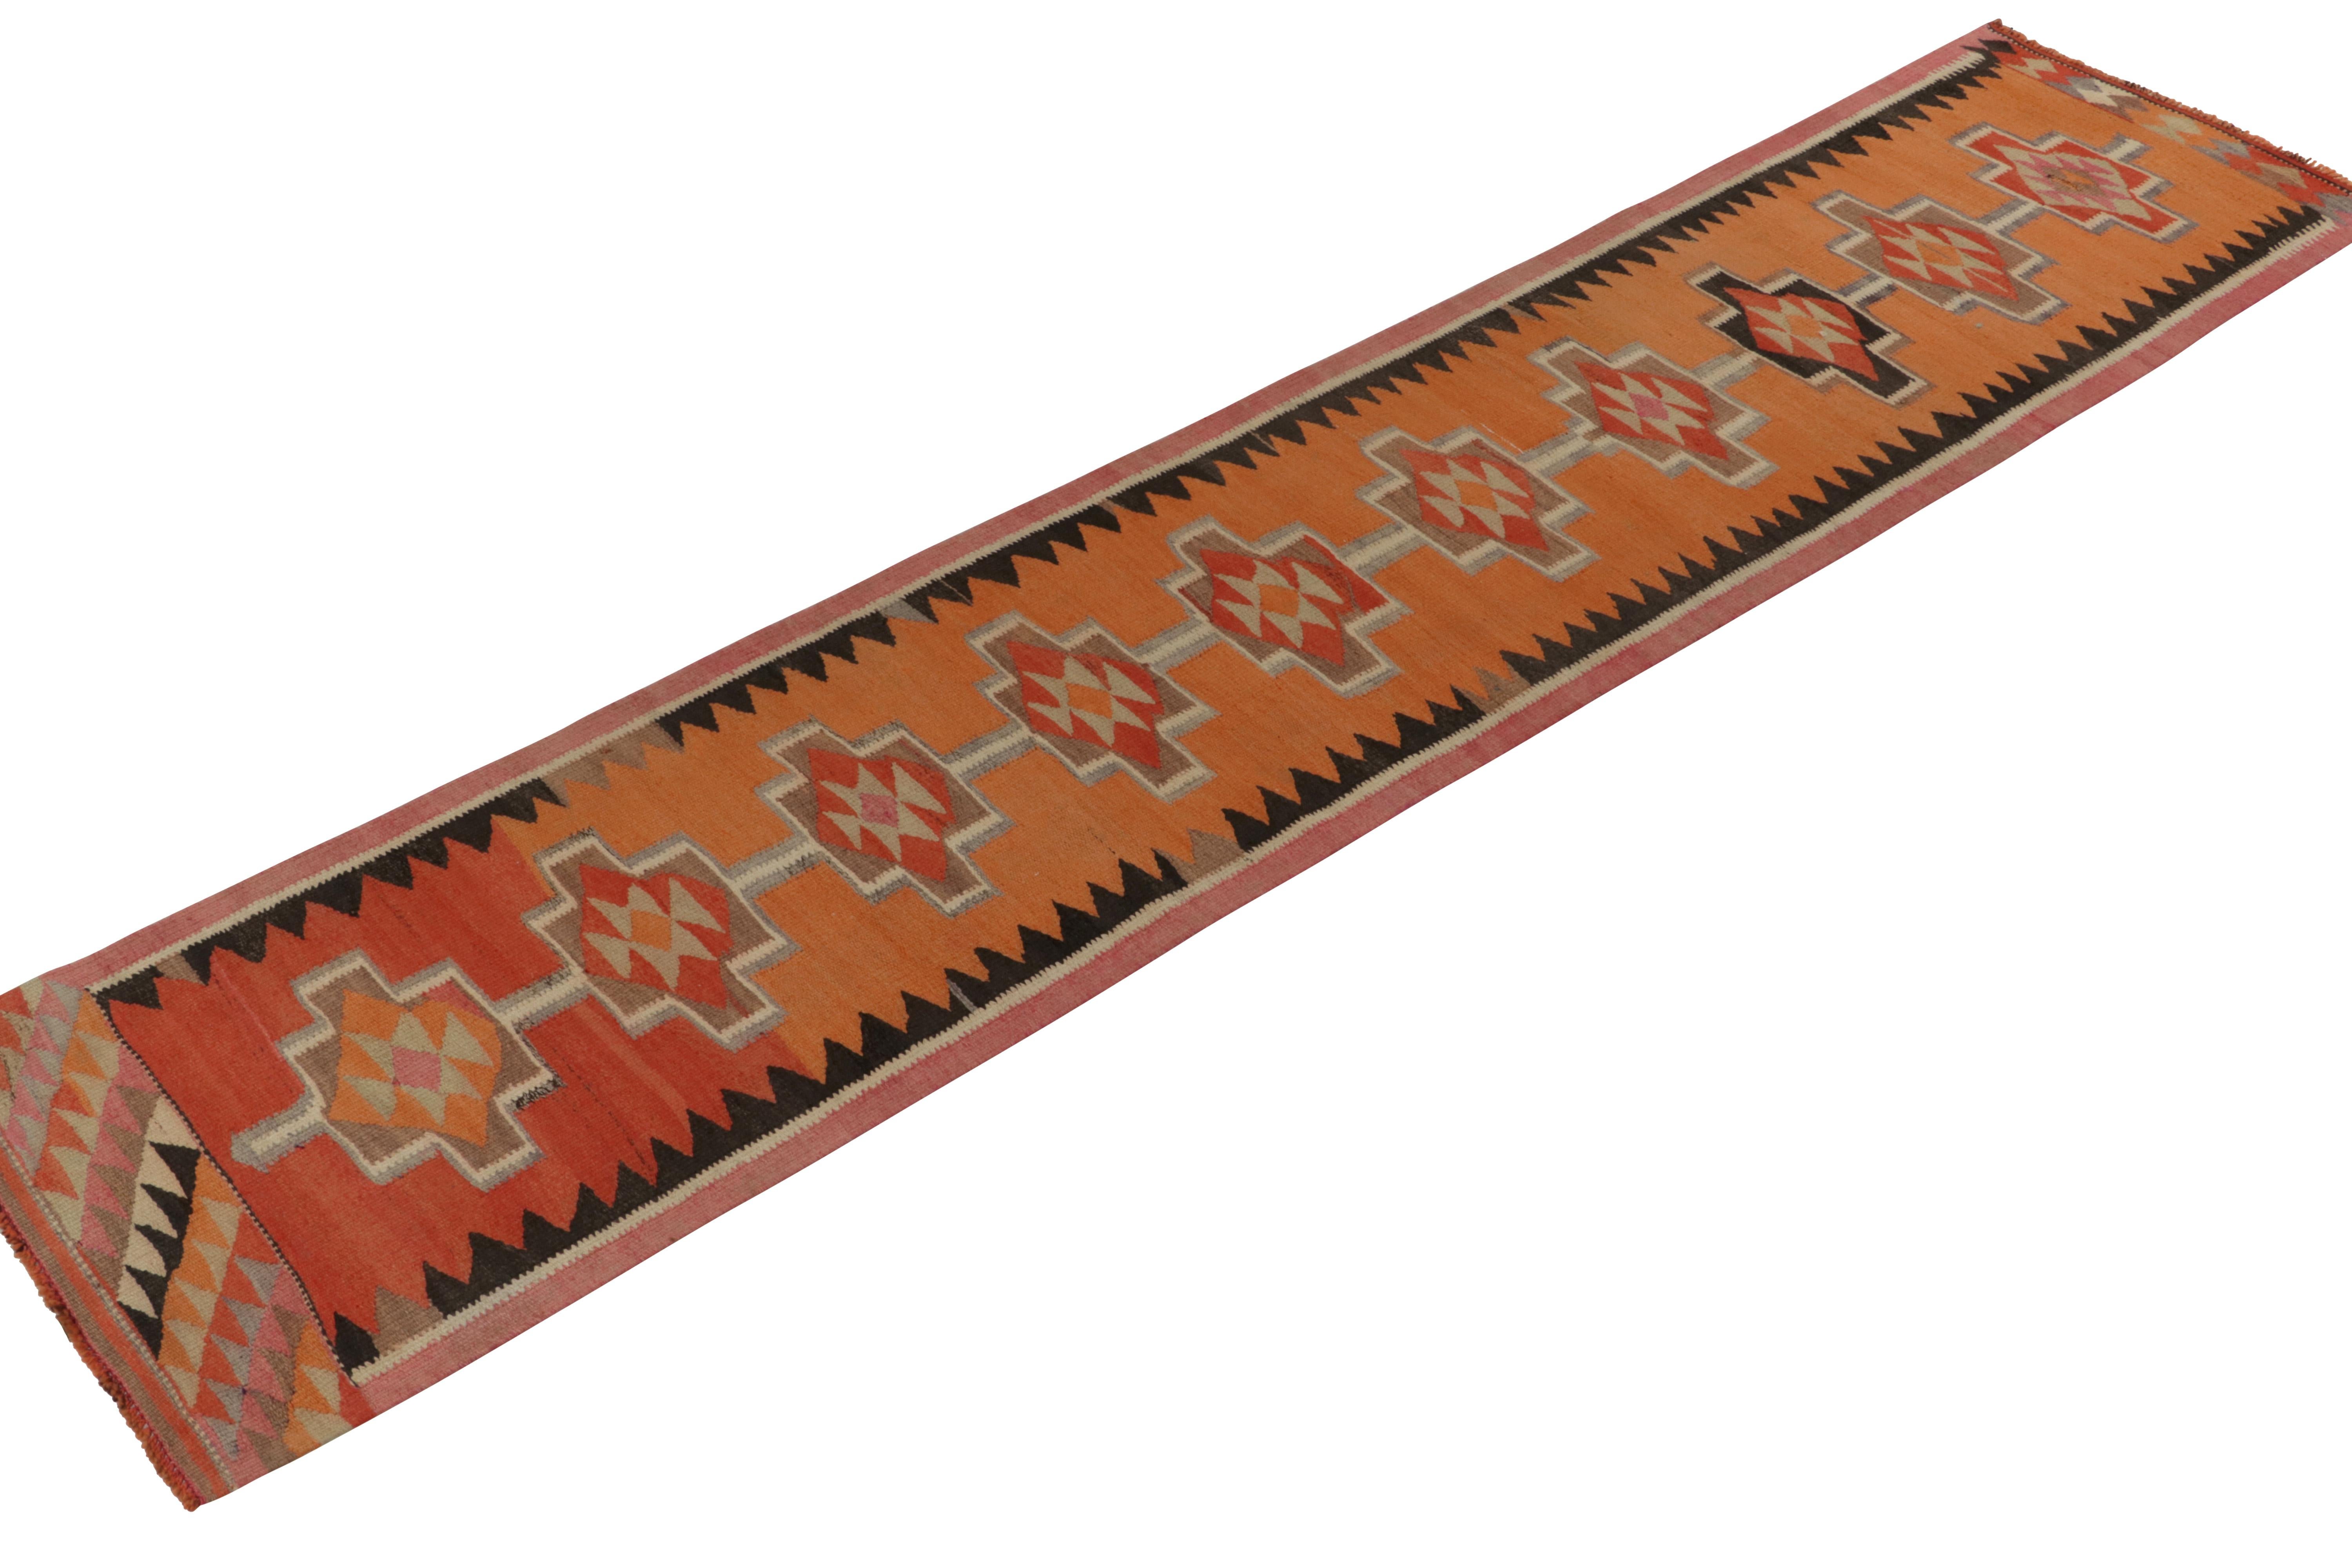 From R&K Principal Josh Nazmiyal’s discerning acquisitions, a distinguished vintage kilim runner originating from Turkey circa 1950-1960. 

On the Design: A series of tribal medallions enjoy arresting movement in the warmth & richness of orange,